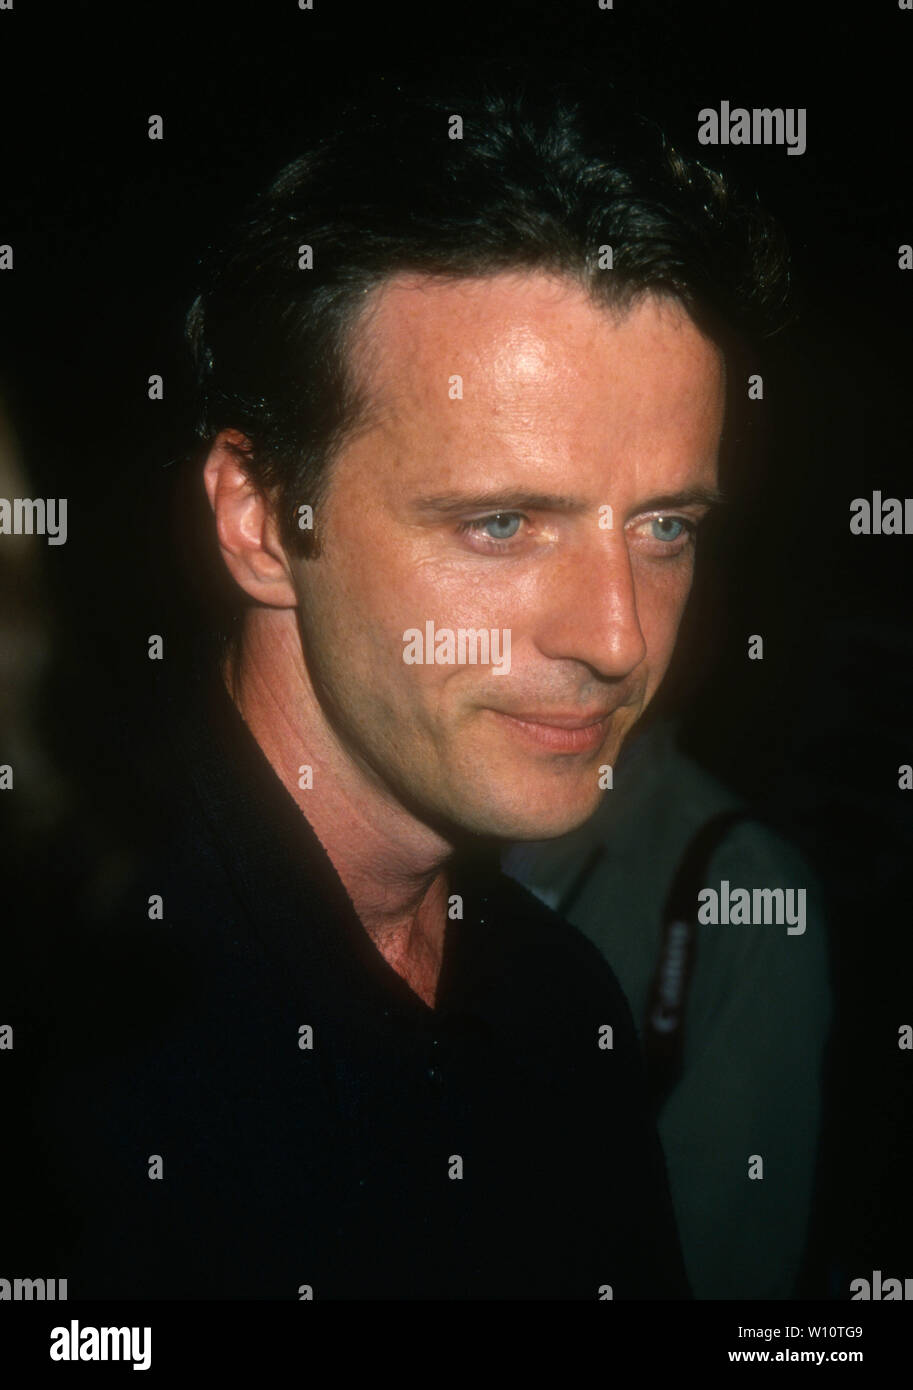 Hollywood, California, USA 9th August 1994 Actor Aidan Quinn attends the premiere of 'The Adventures of Priscilla, Queen of the Desert' on August 9, 1994 at Cinerama Dome Theater in Hollywood, California, USA. Photo by Barry King/Alamy Stock Photo Stock Photo